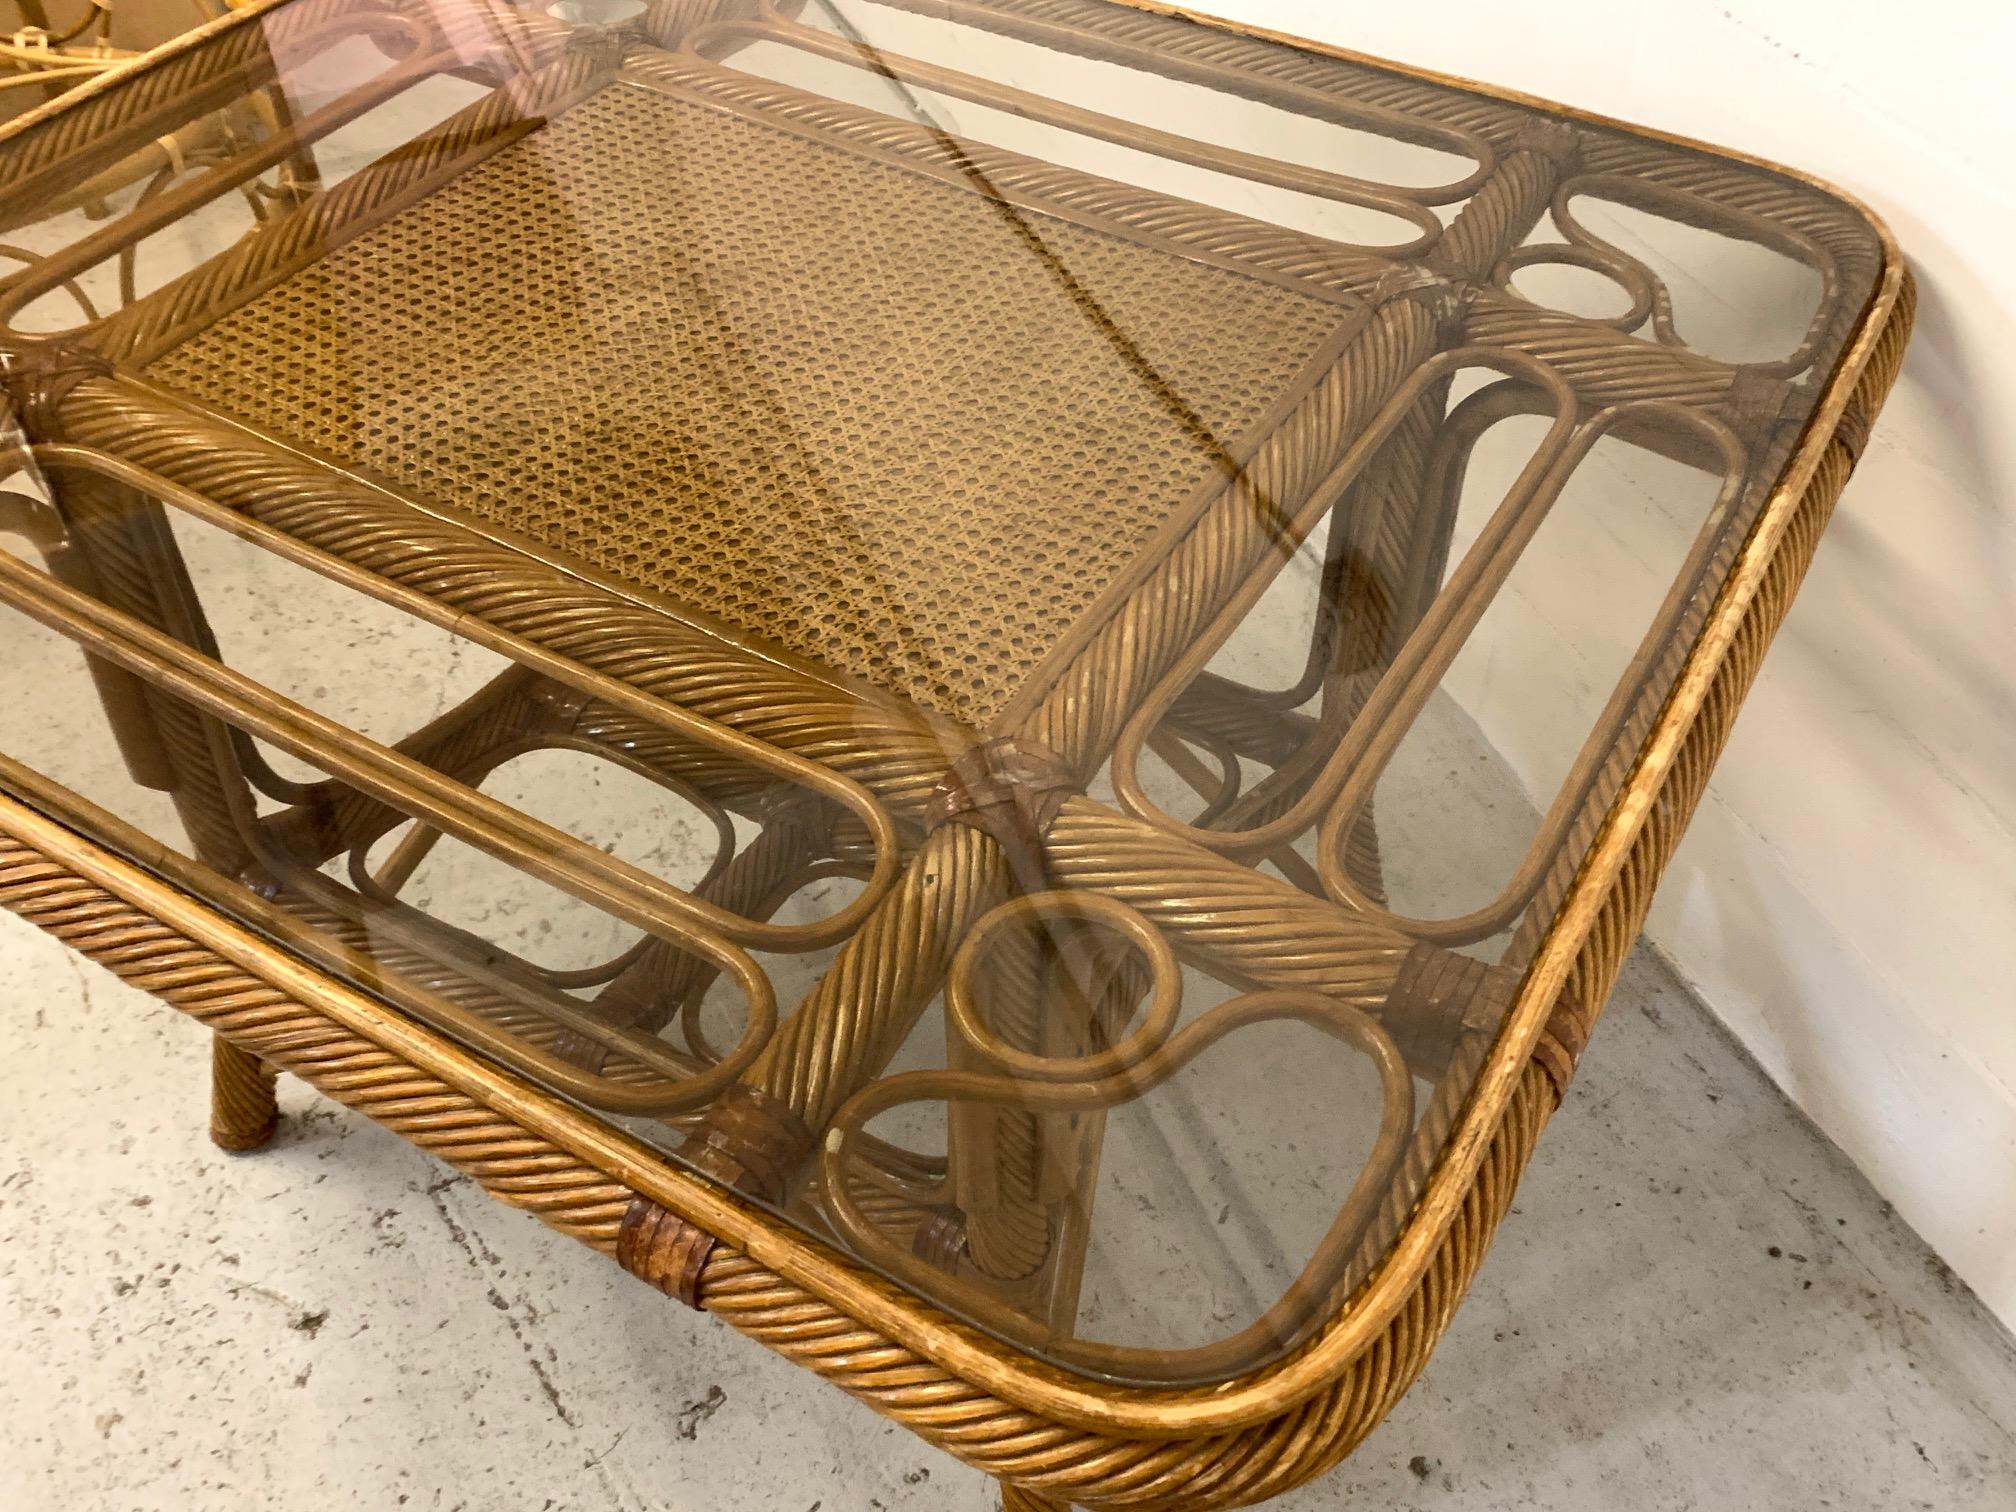 Vintage rattan dining table features cane and twisted reed detailing and a glass top. Good vintage condition with minor imperfections consistent with age.